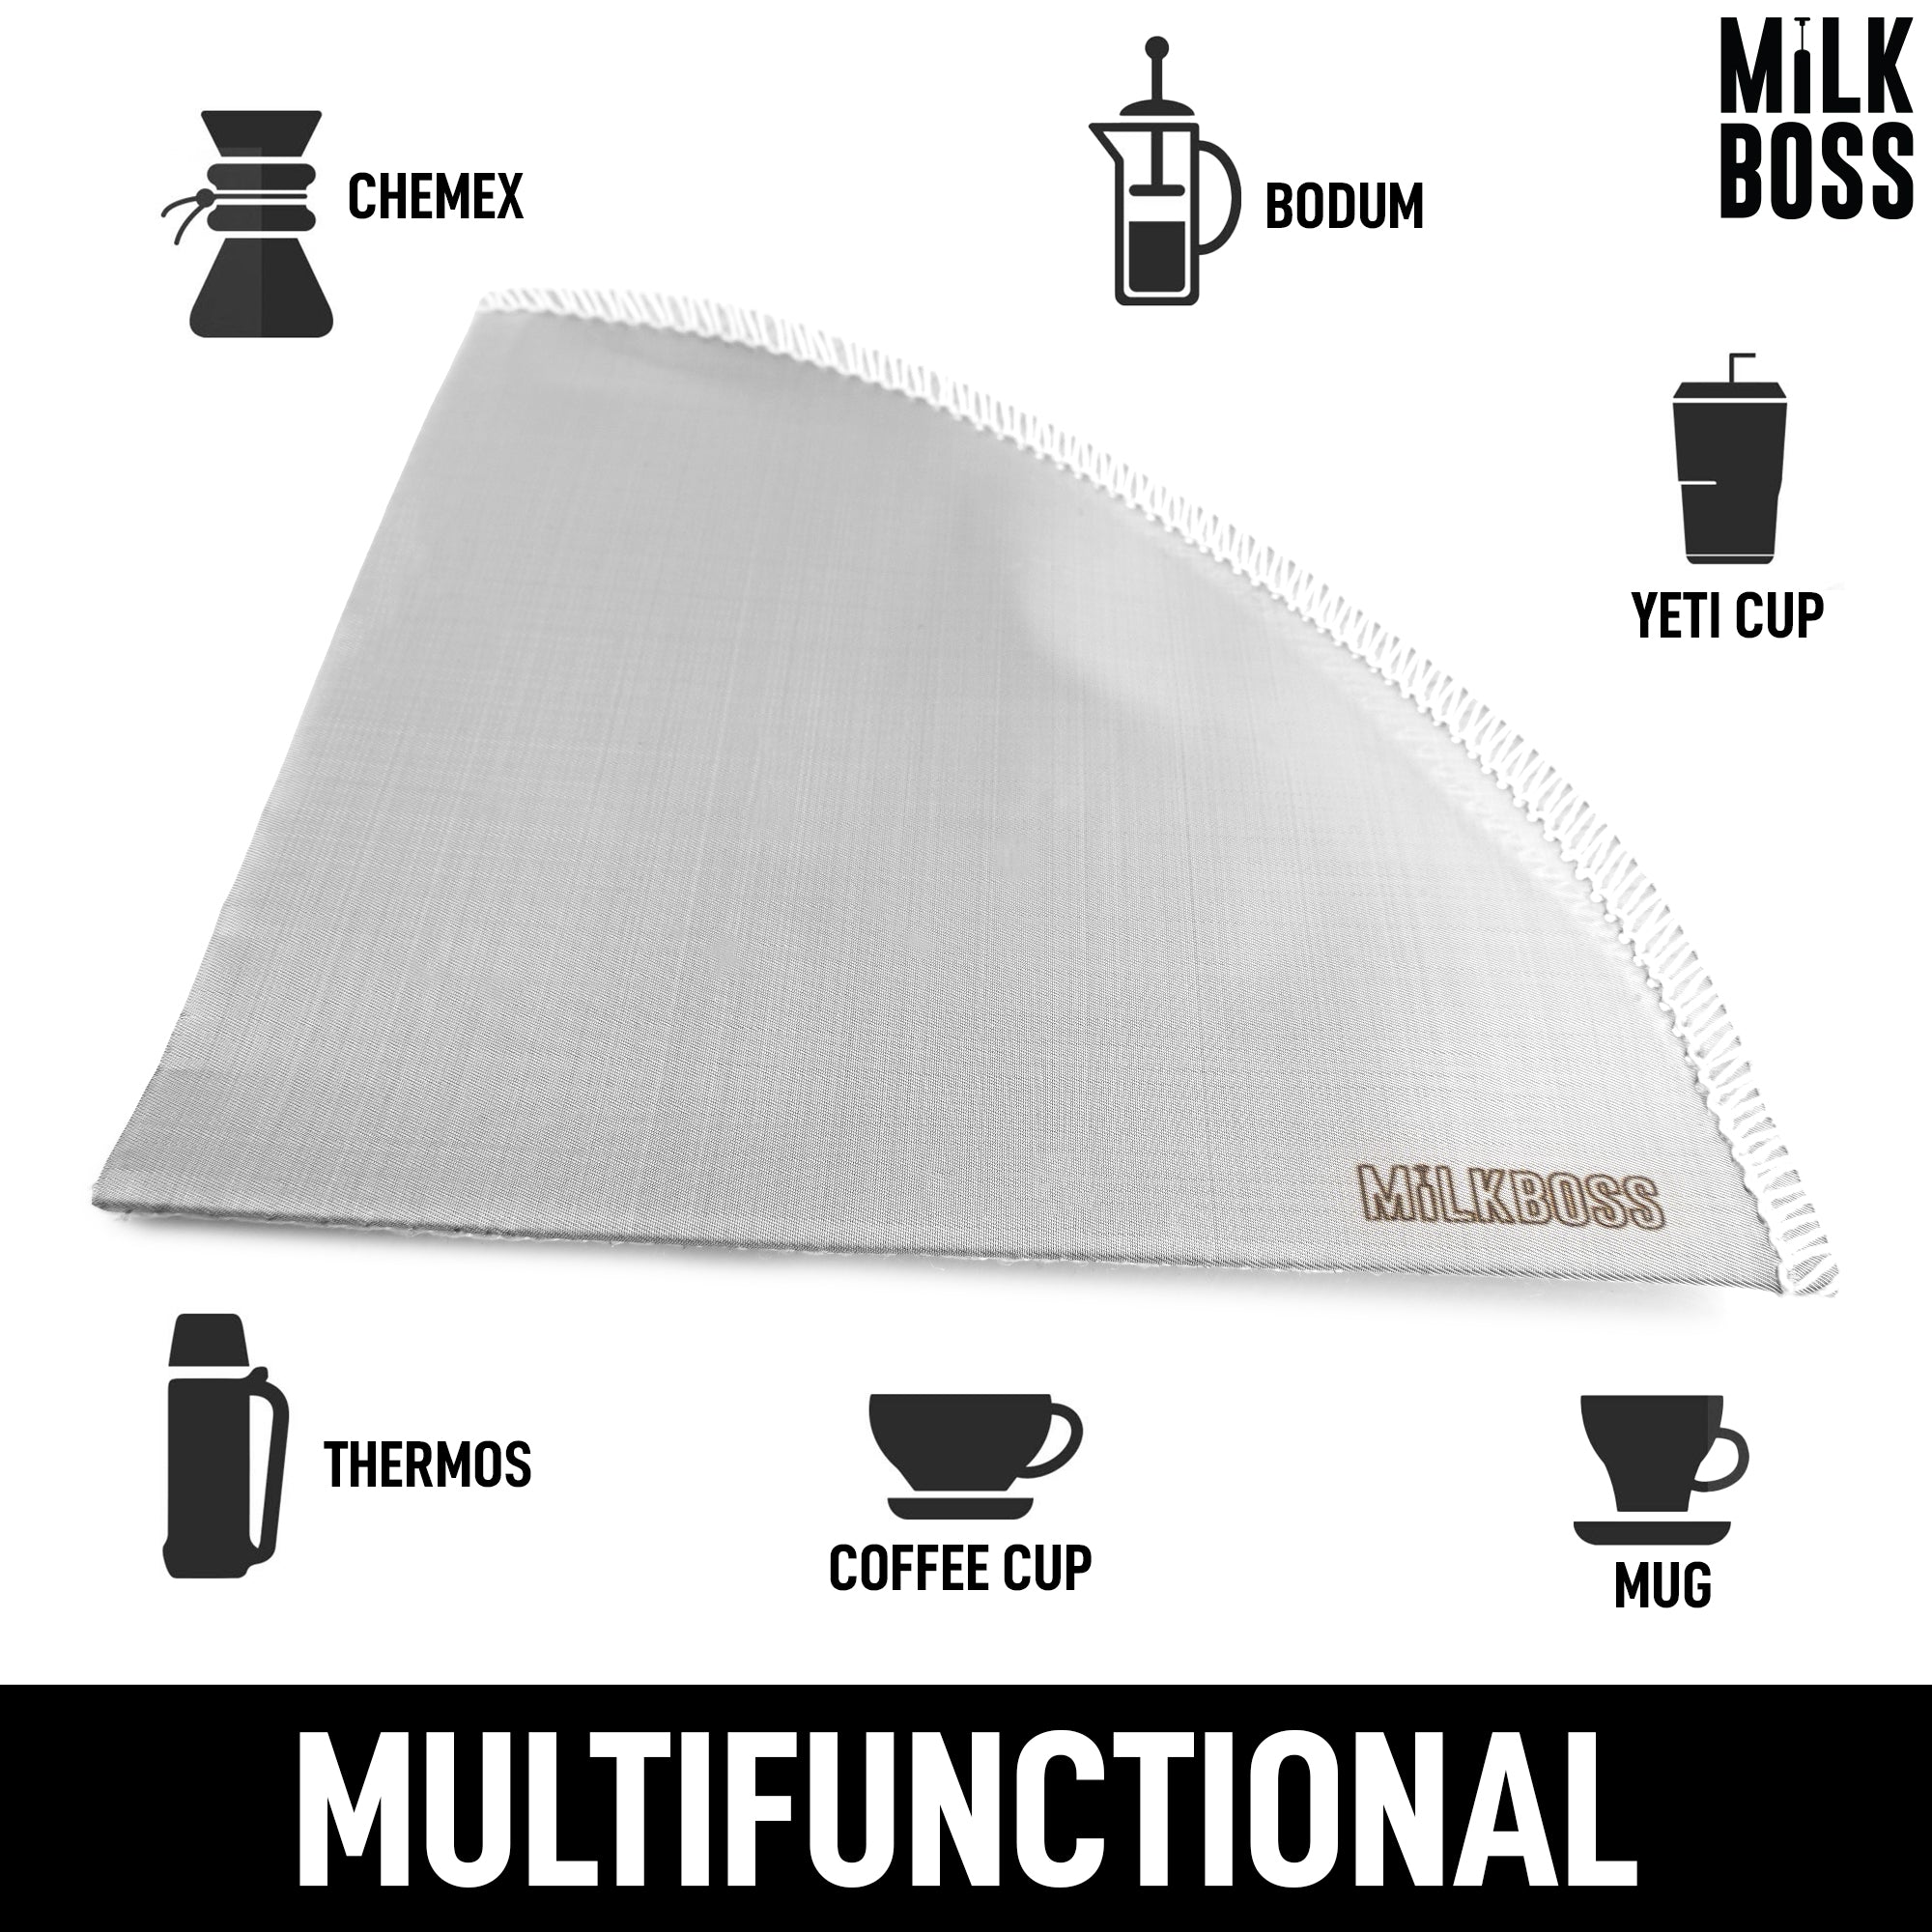 Milk Boss Pour Over Coffee Filter - Permanent Paperless Stainless Steel Reusable Coffee Filter - Flexible Fine Mesh Coffee Filter Reusable For Hario, Chemex, Ovalware, and Other Carafes (Filter #1) from Zulay Kitchen